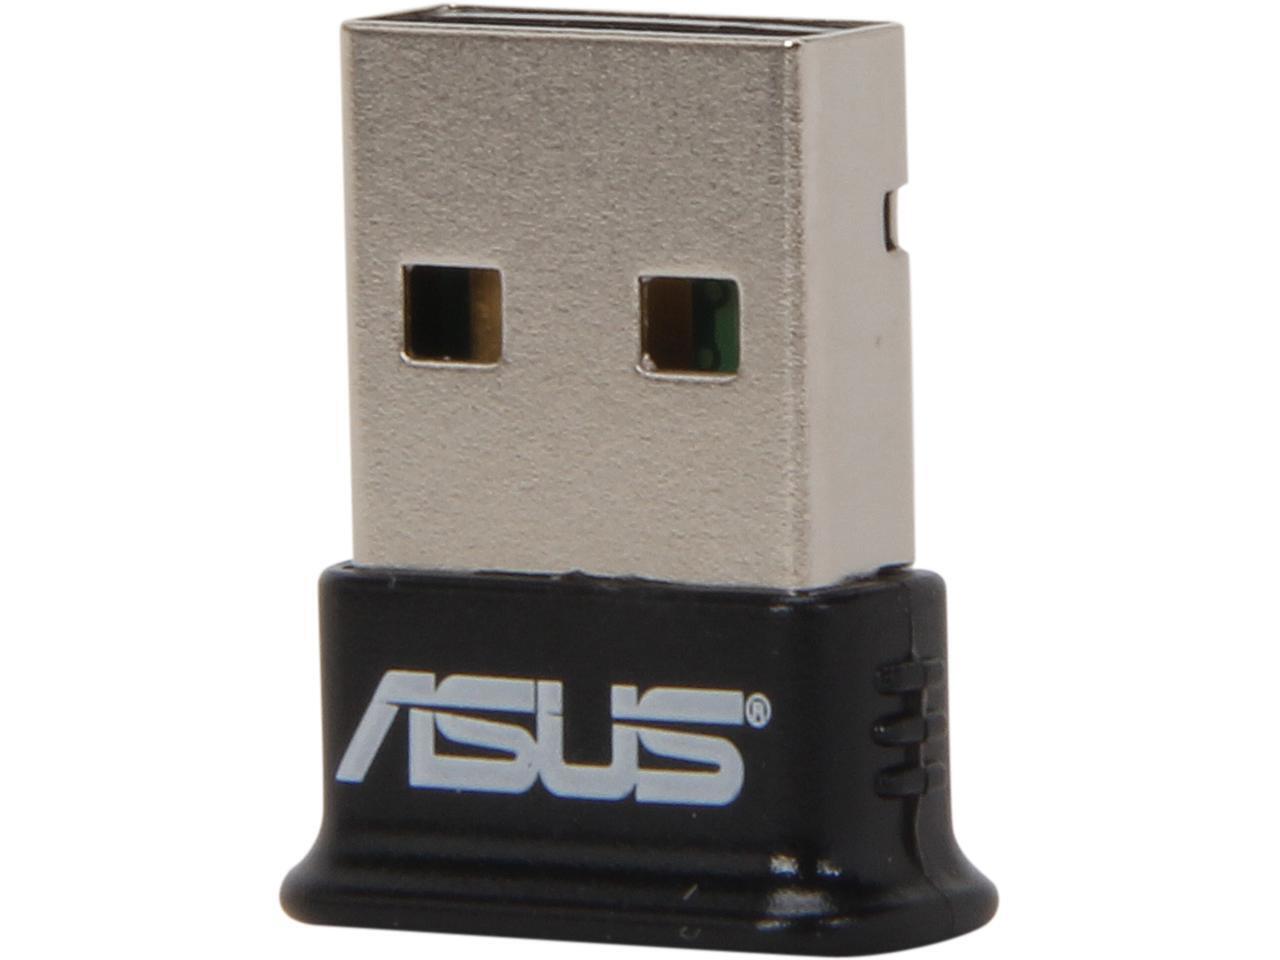 ASUS USB-BT400 USB Adapter w/ Bluetooth Dongle Receiver Laptop & PC Plug & Play